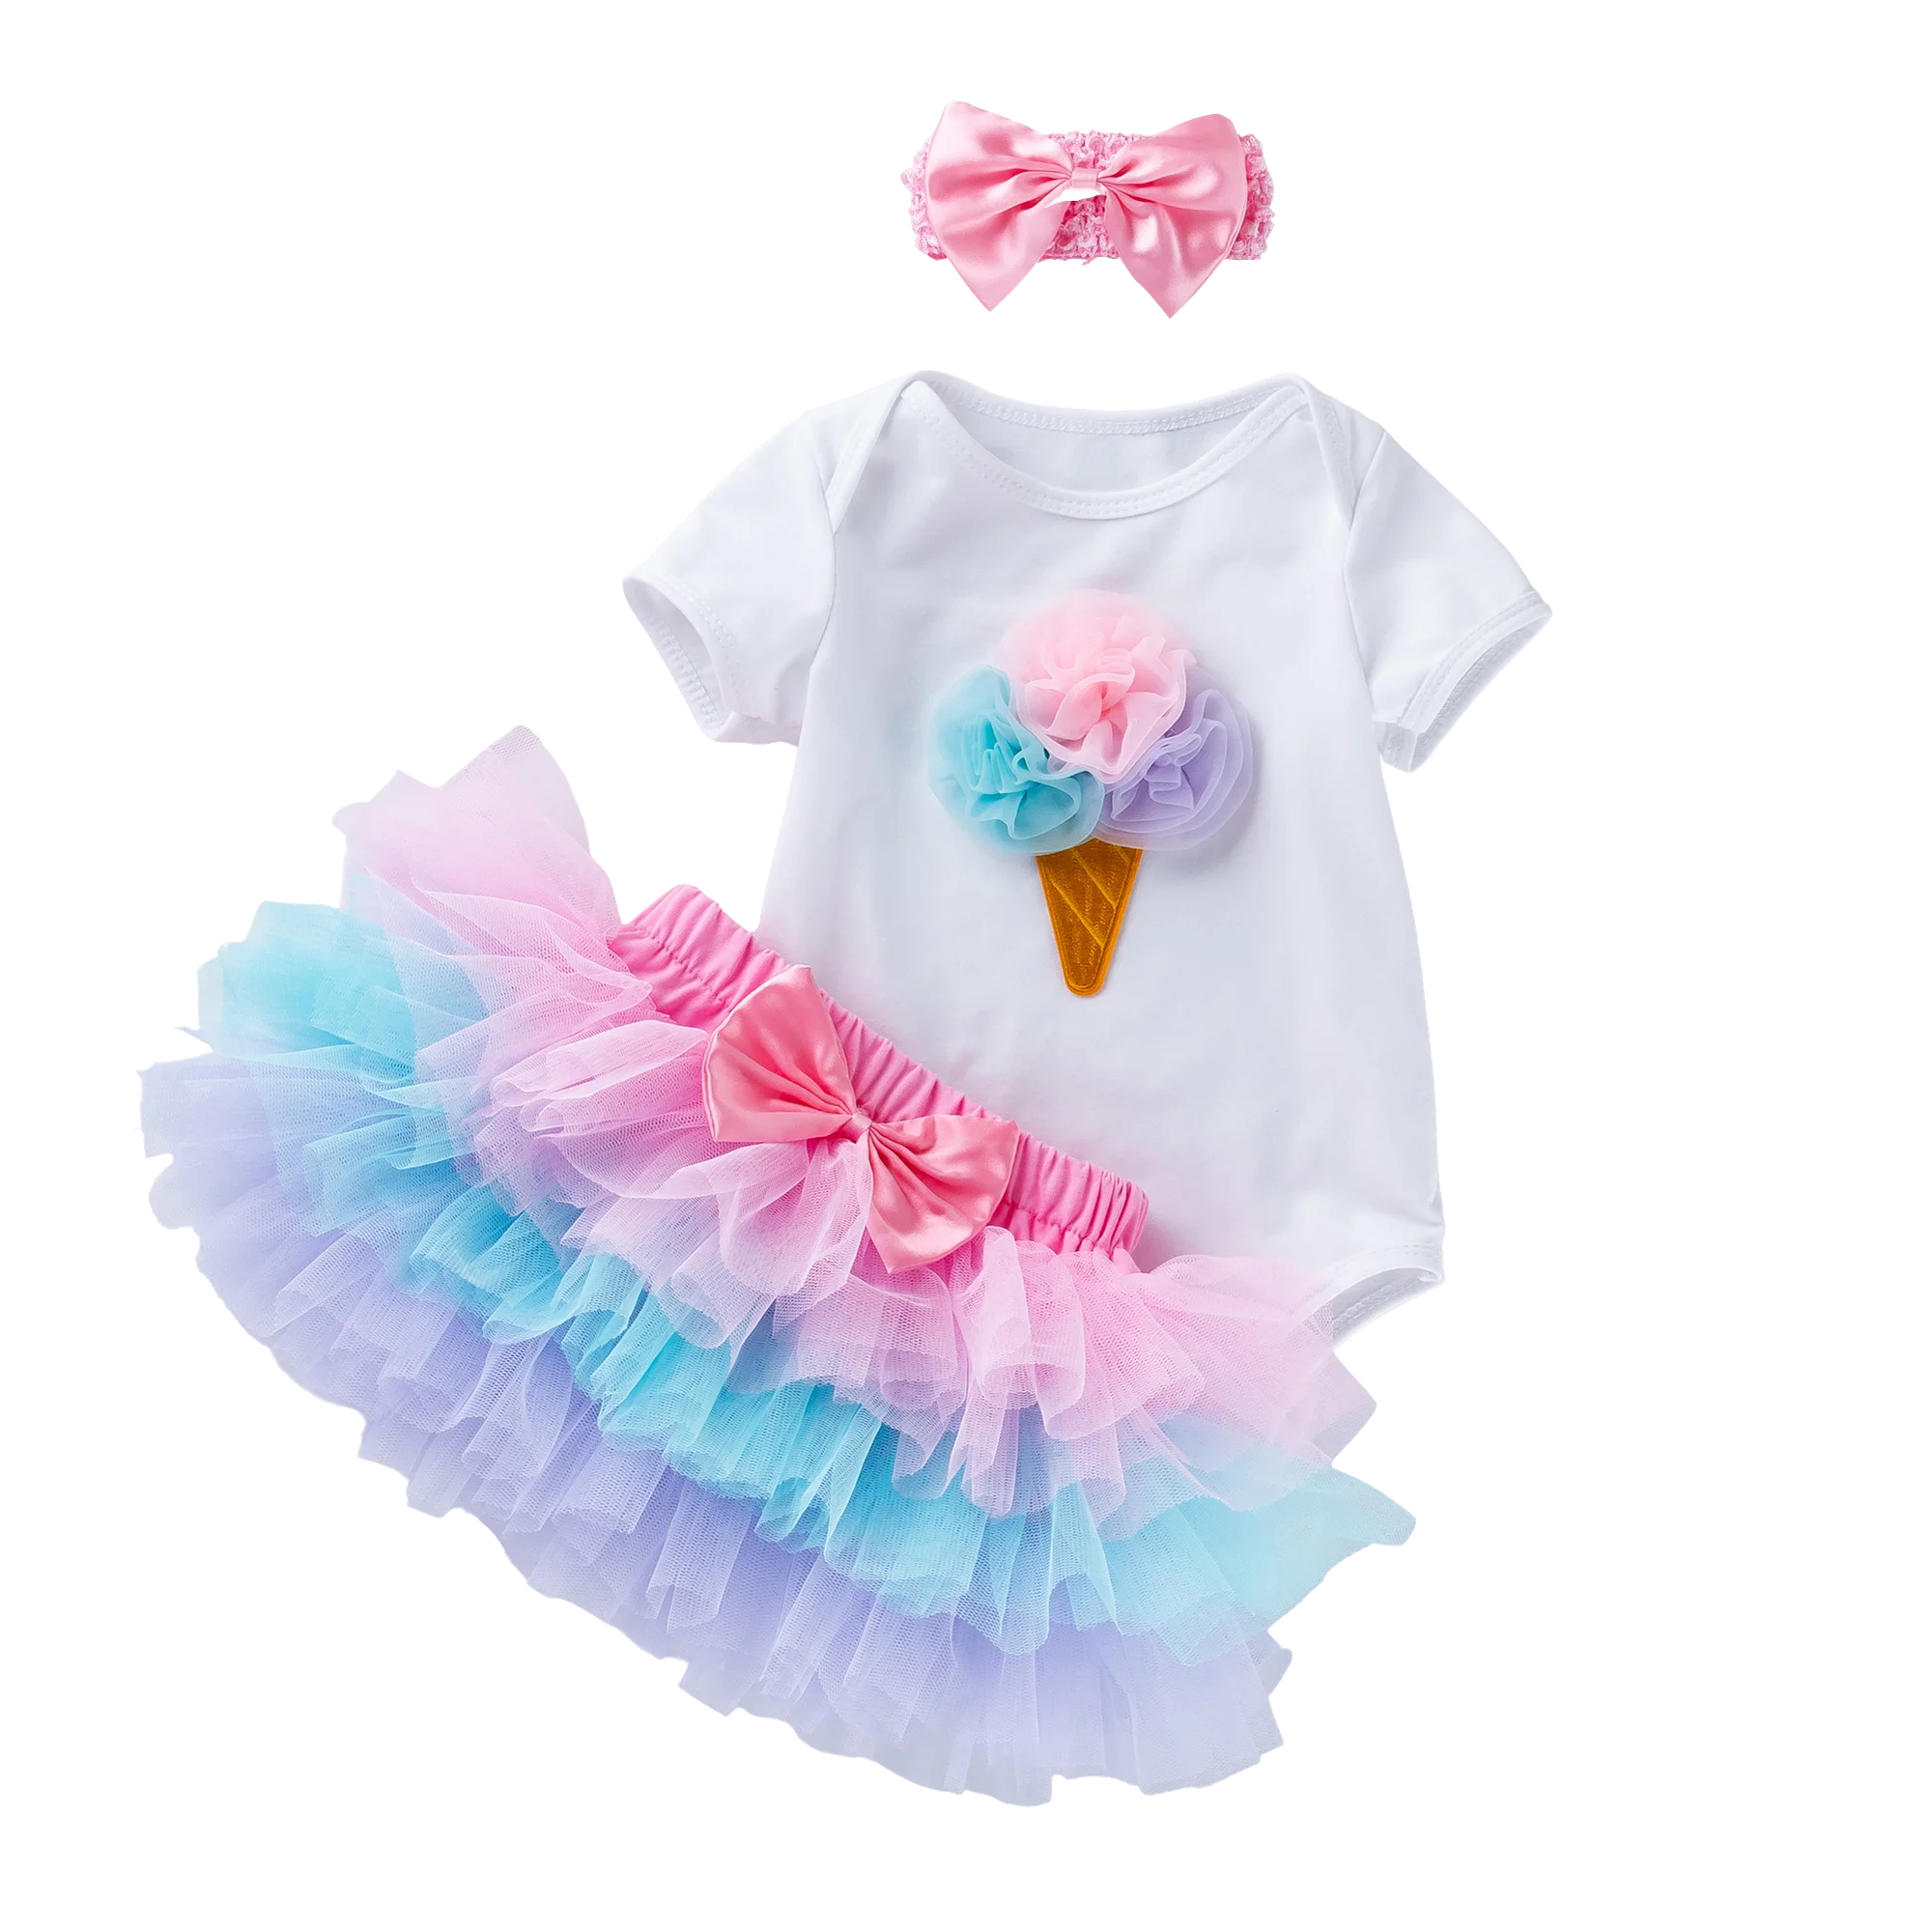 

Babany bebe 0-2 Years Baby Girls My First Birthday Cake Outfit Short Sleeve Costume 3pcs, Picture shown